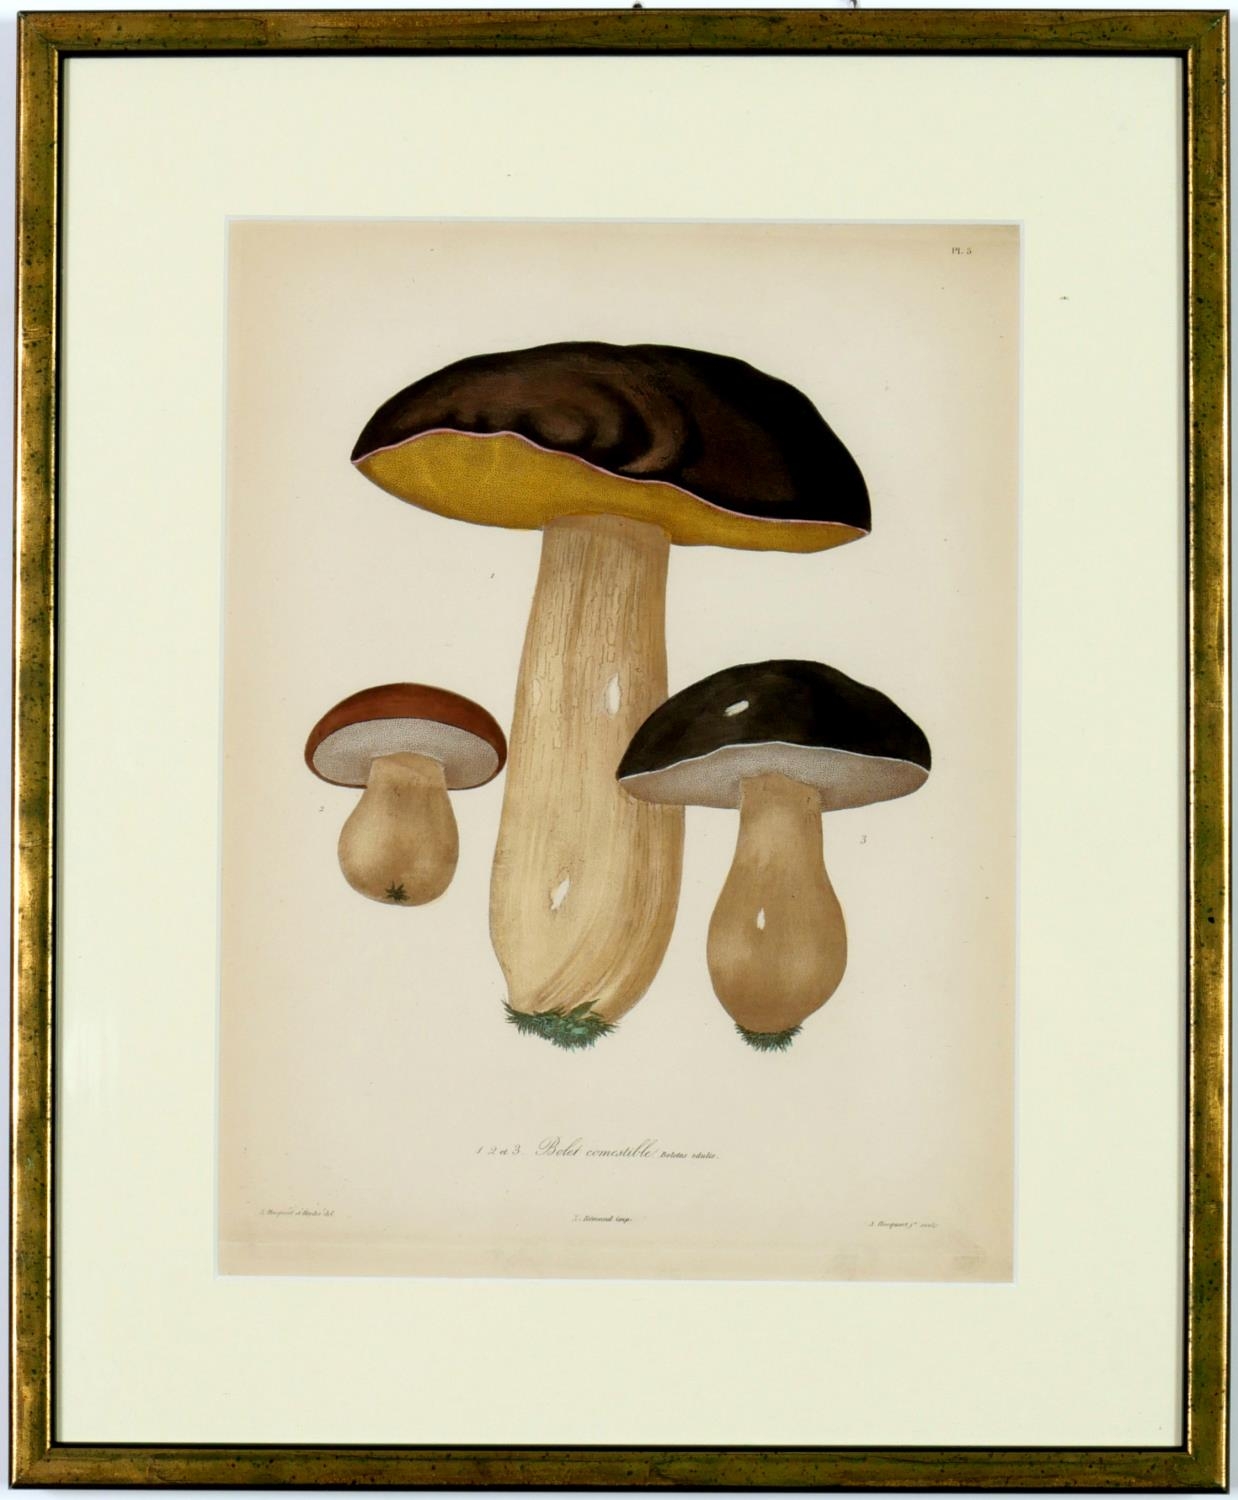 JOSEPH ROQUES, Mushrooms, a set of nine rare engravings with hand colouring, 1864, Victor Masson - Image 4 of 10